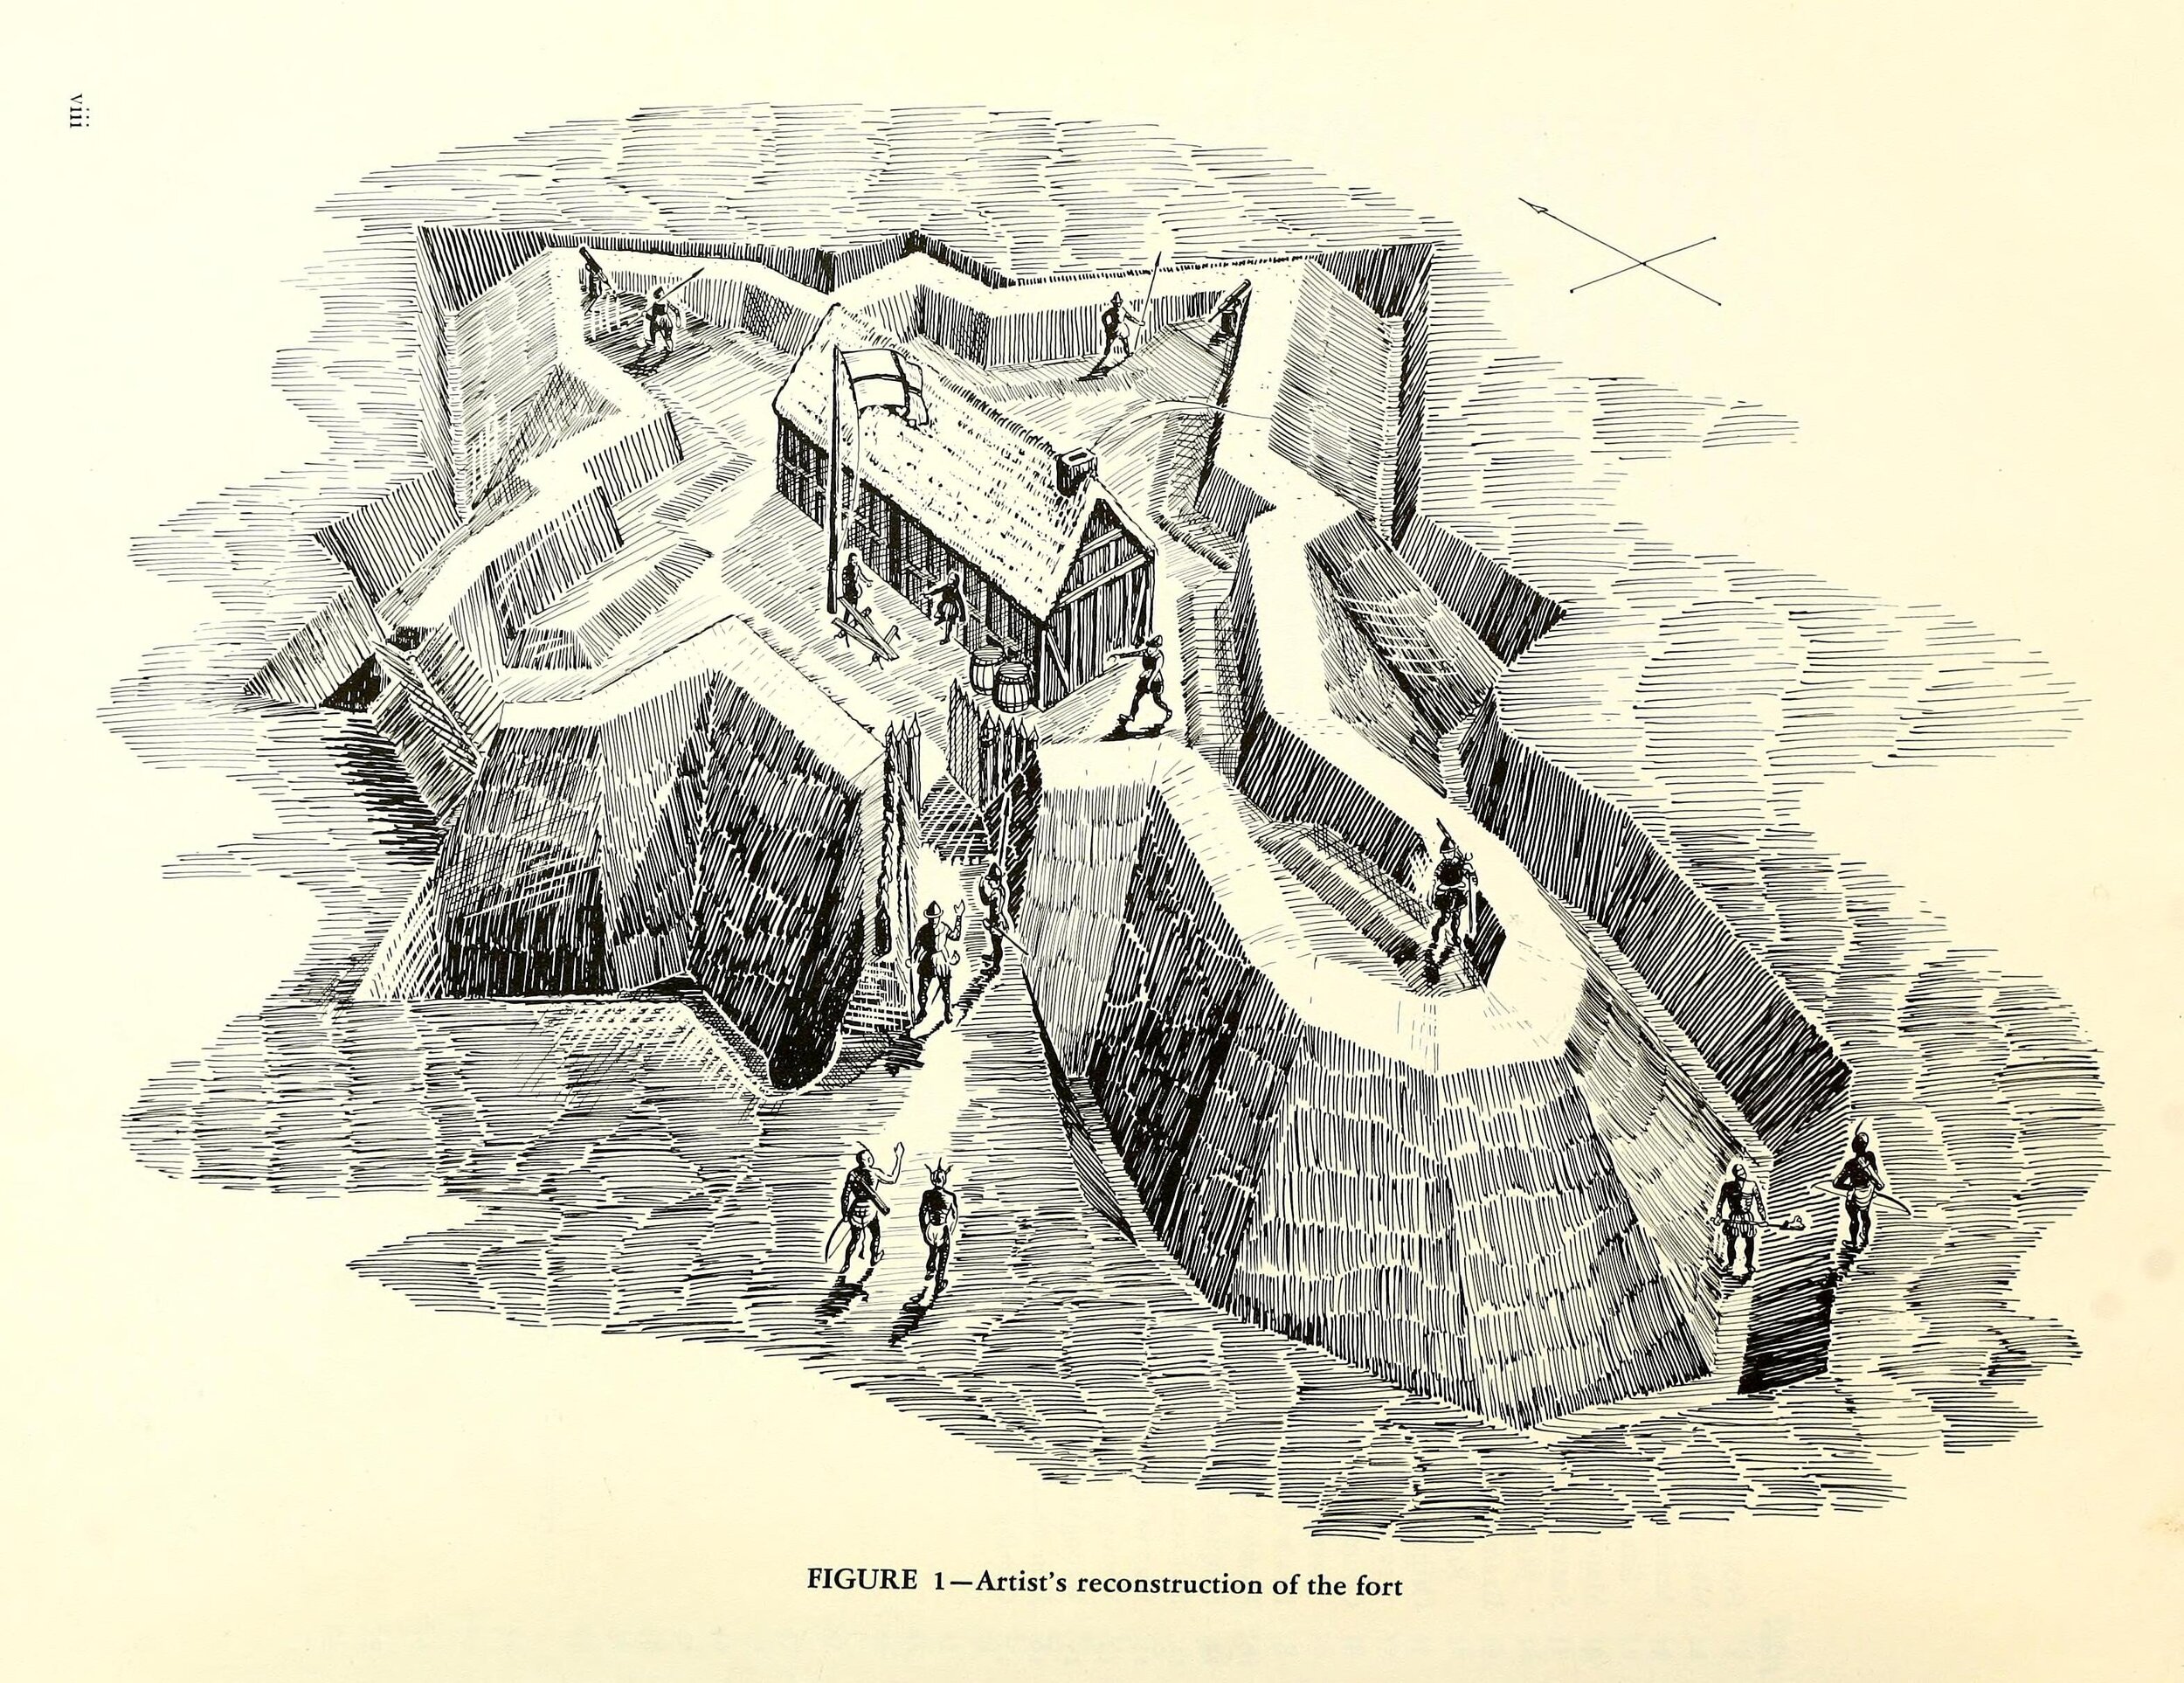  “A 1962 illustration depicting the artist's reconstruction of the fort built by Ralph Lane for the 1585 Roanoke Colony. In modern times the fort has come to be known as "Fort Raleigh," particularly since efforts to restore the earthwork at Fort Rale